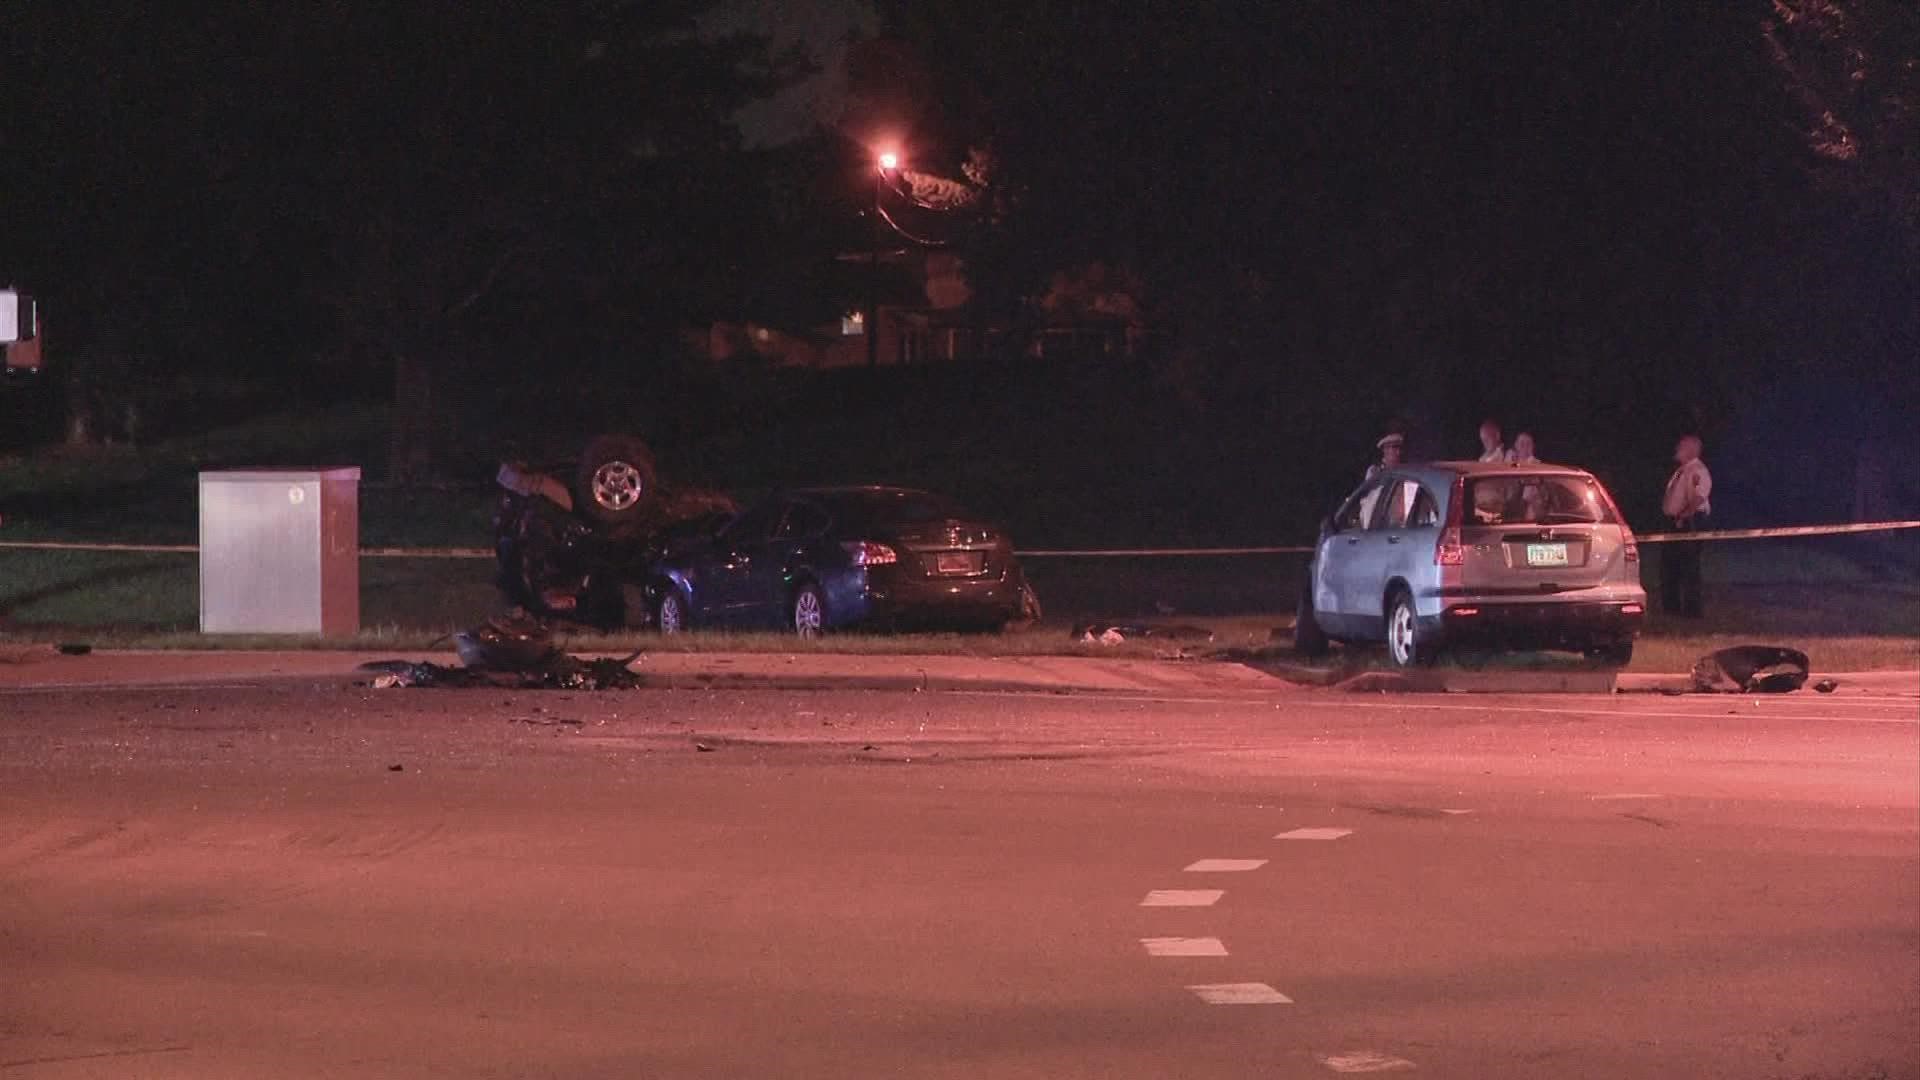 Three people were taken to the hospital following the crash.